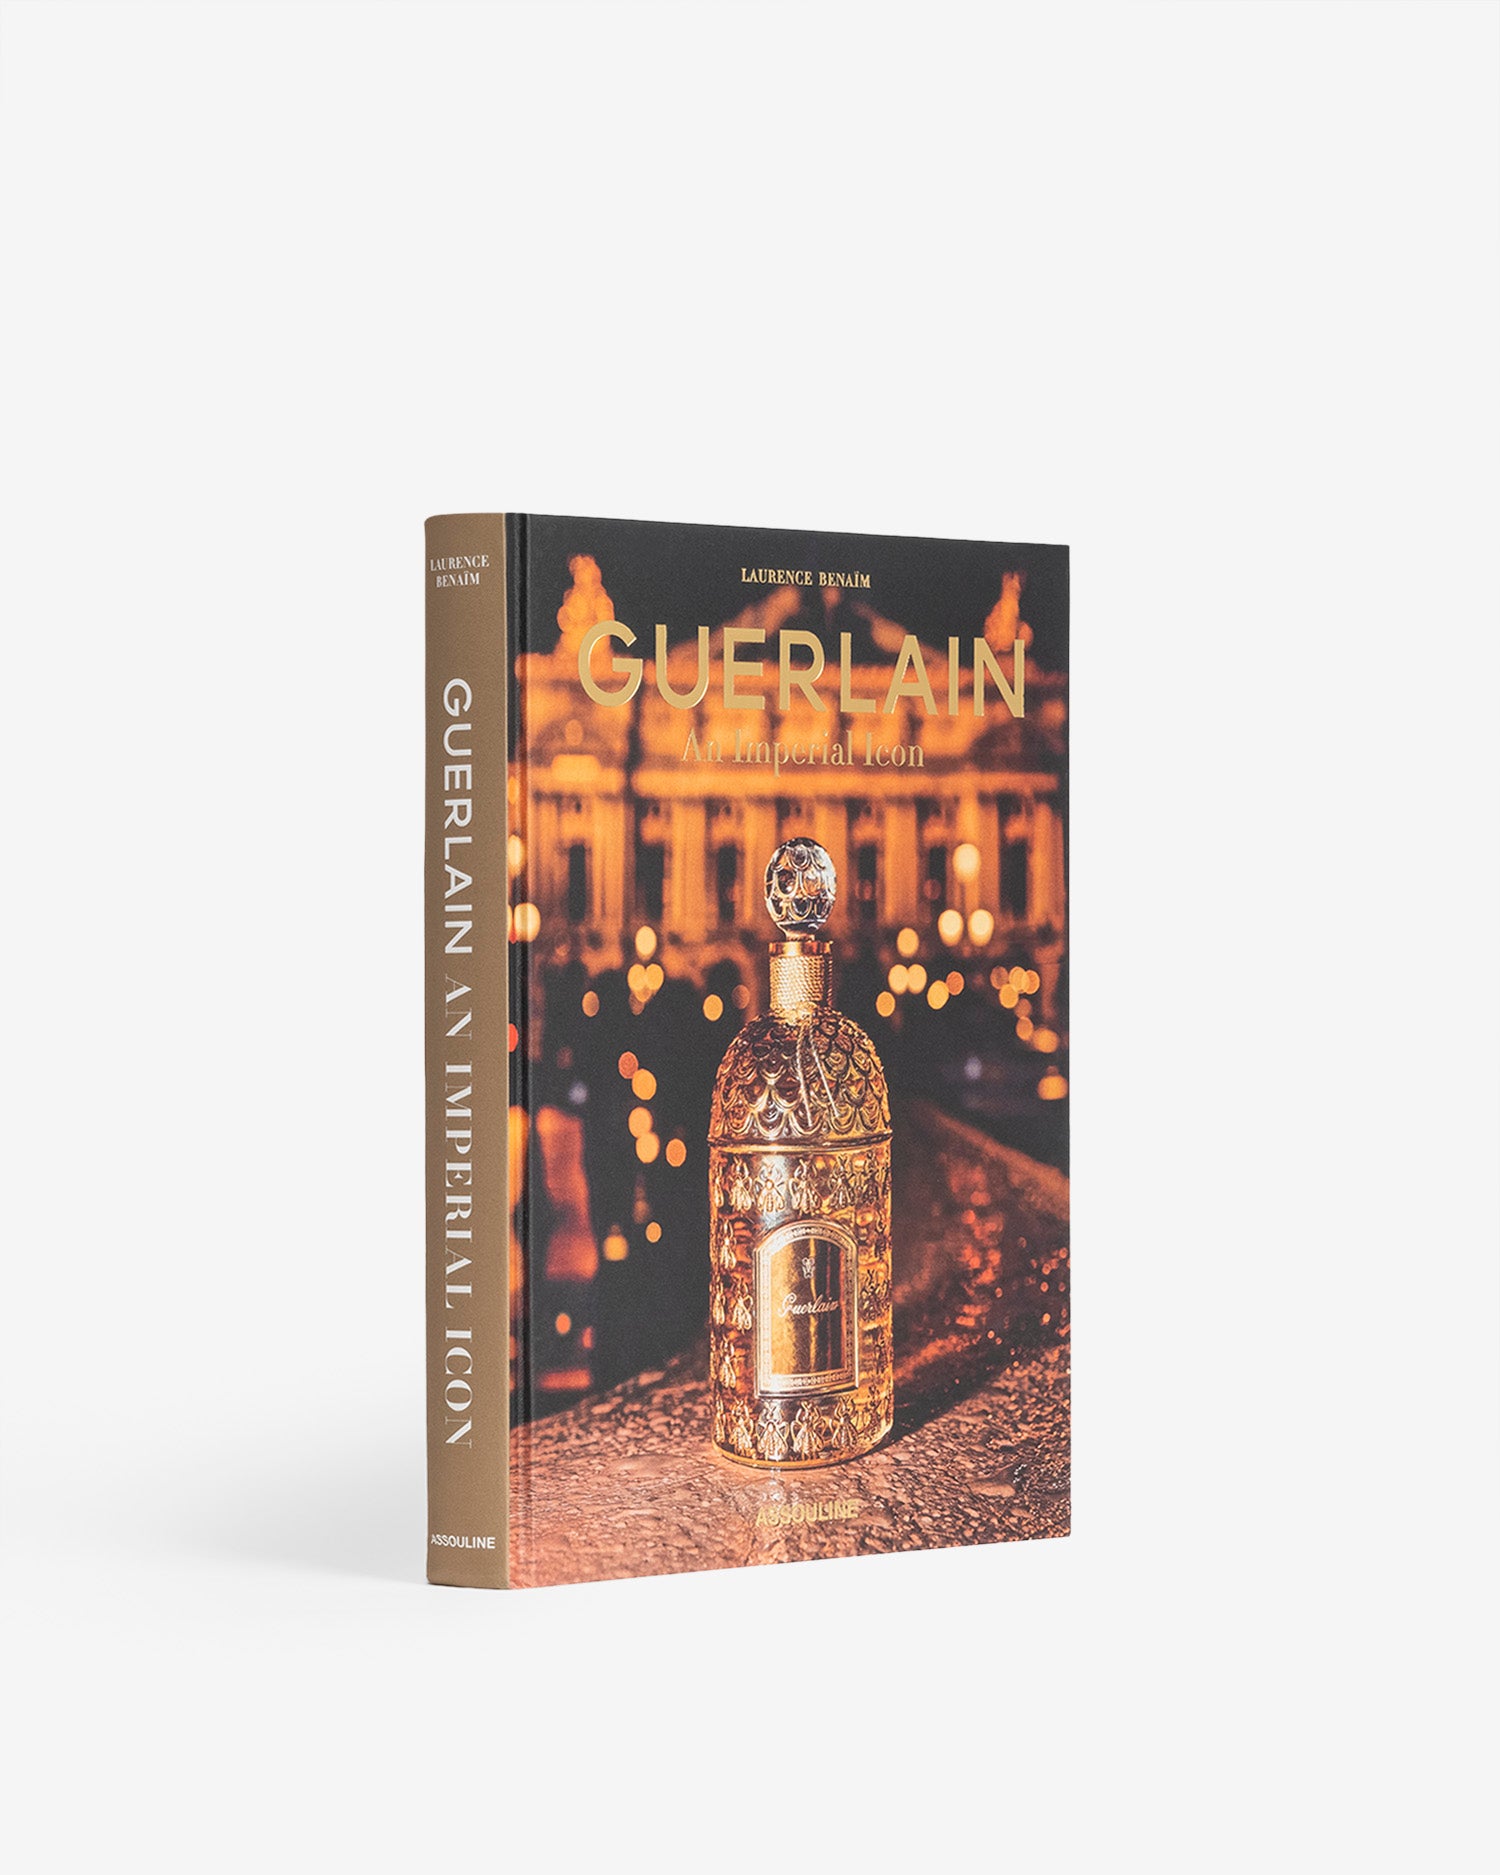 Guerlain: An Imperial Icon by Laurence Benaïm - Coffee Table Book 